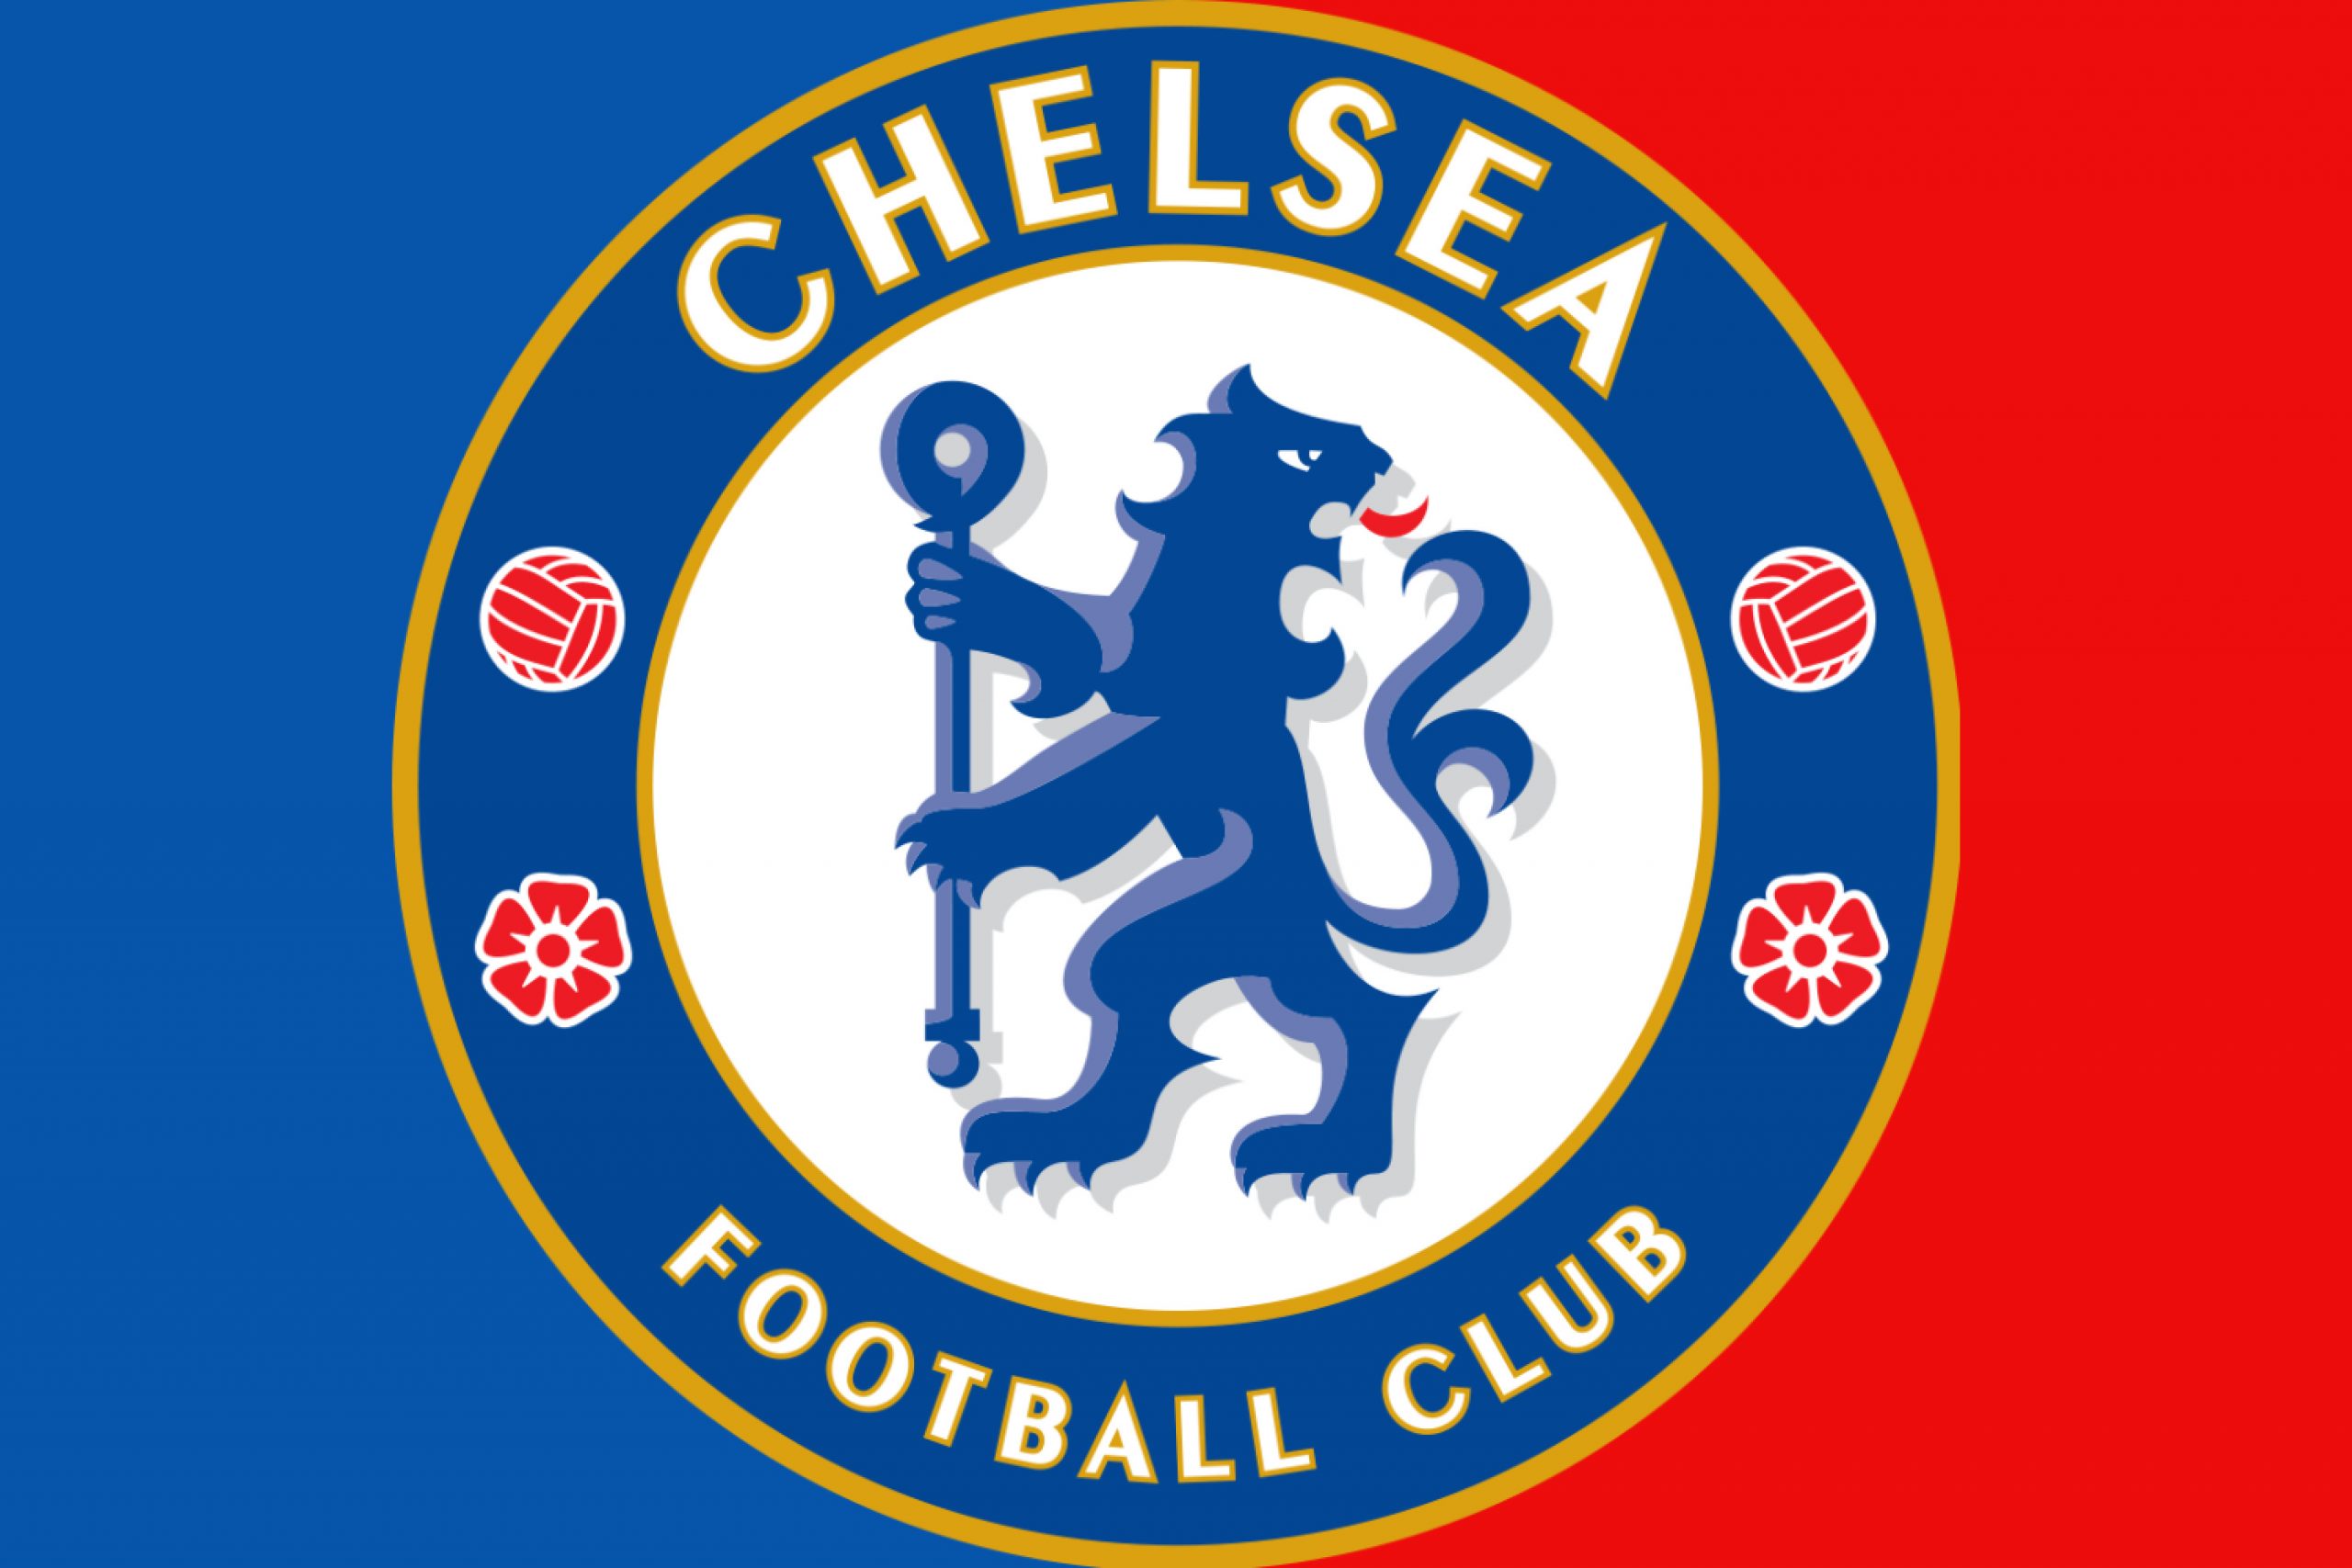 New photos of Chelsea’s stomach-churning third kit for 20/21 season arrives online